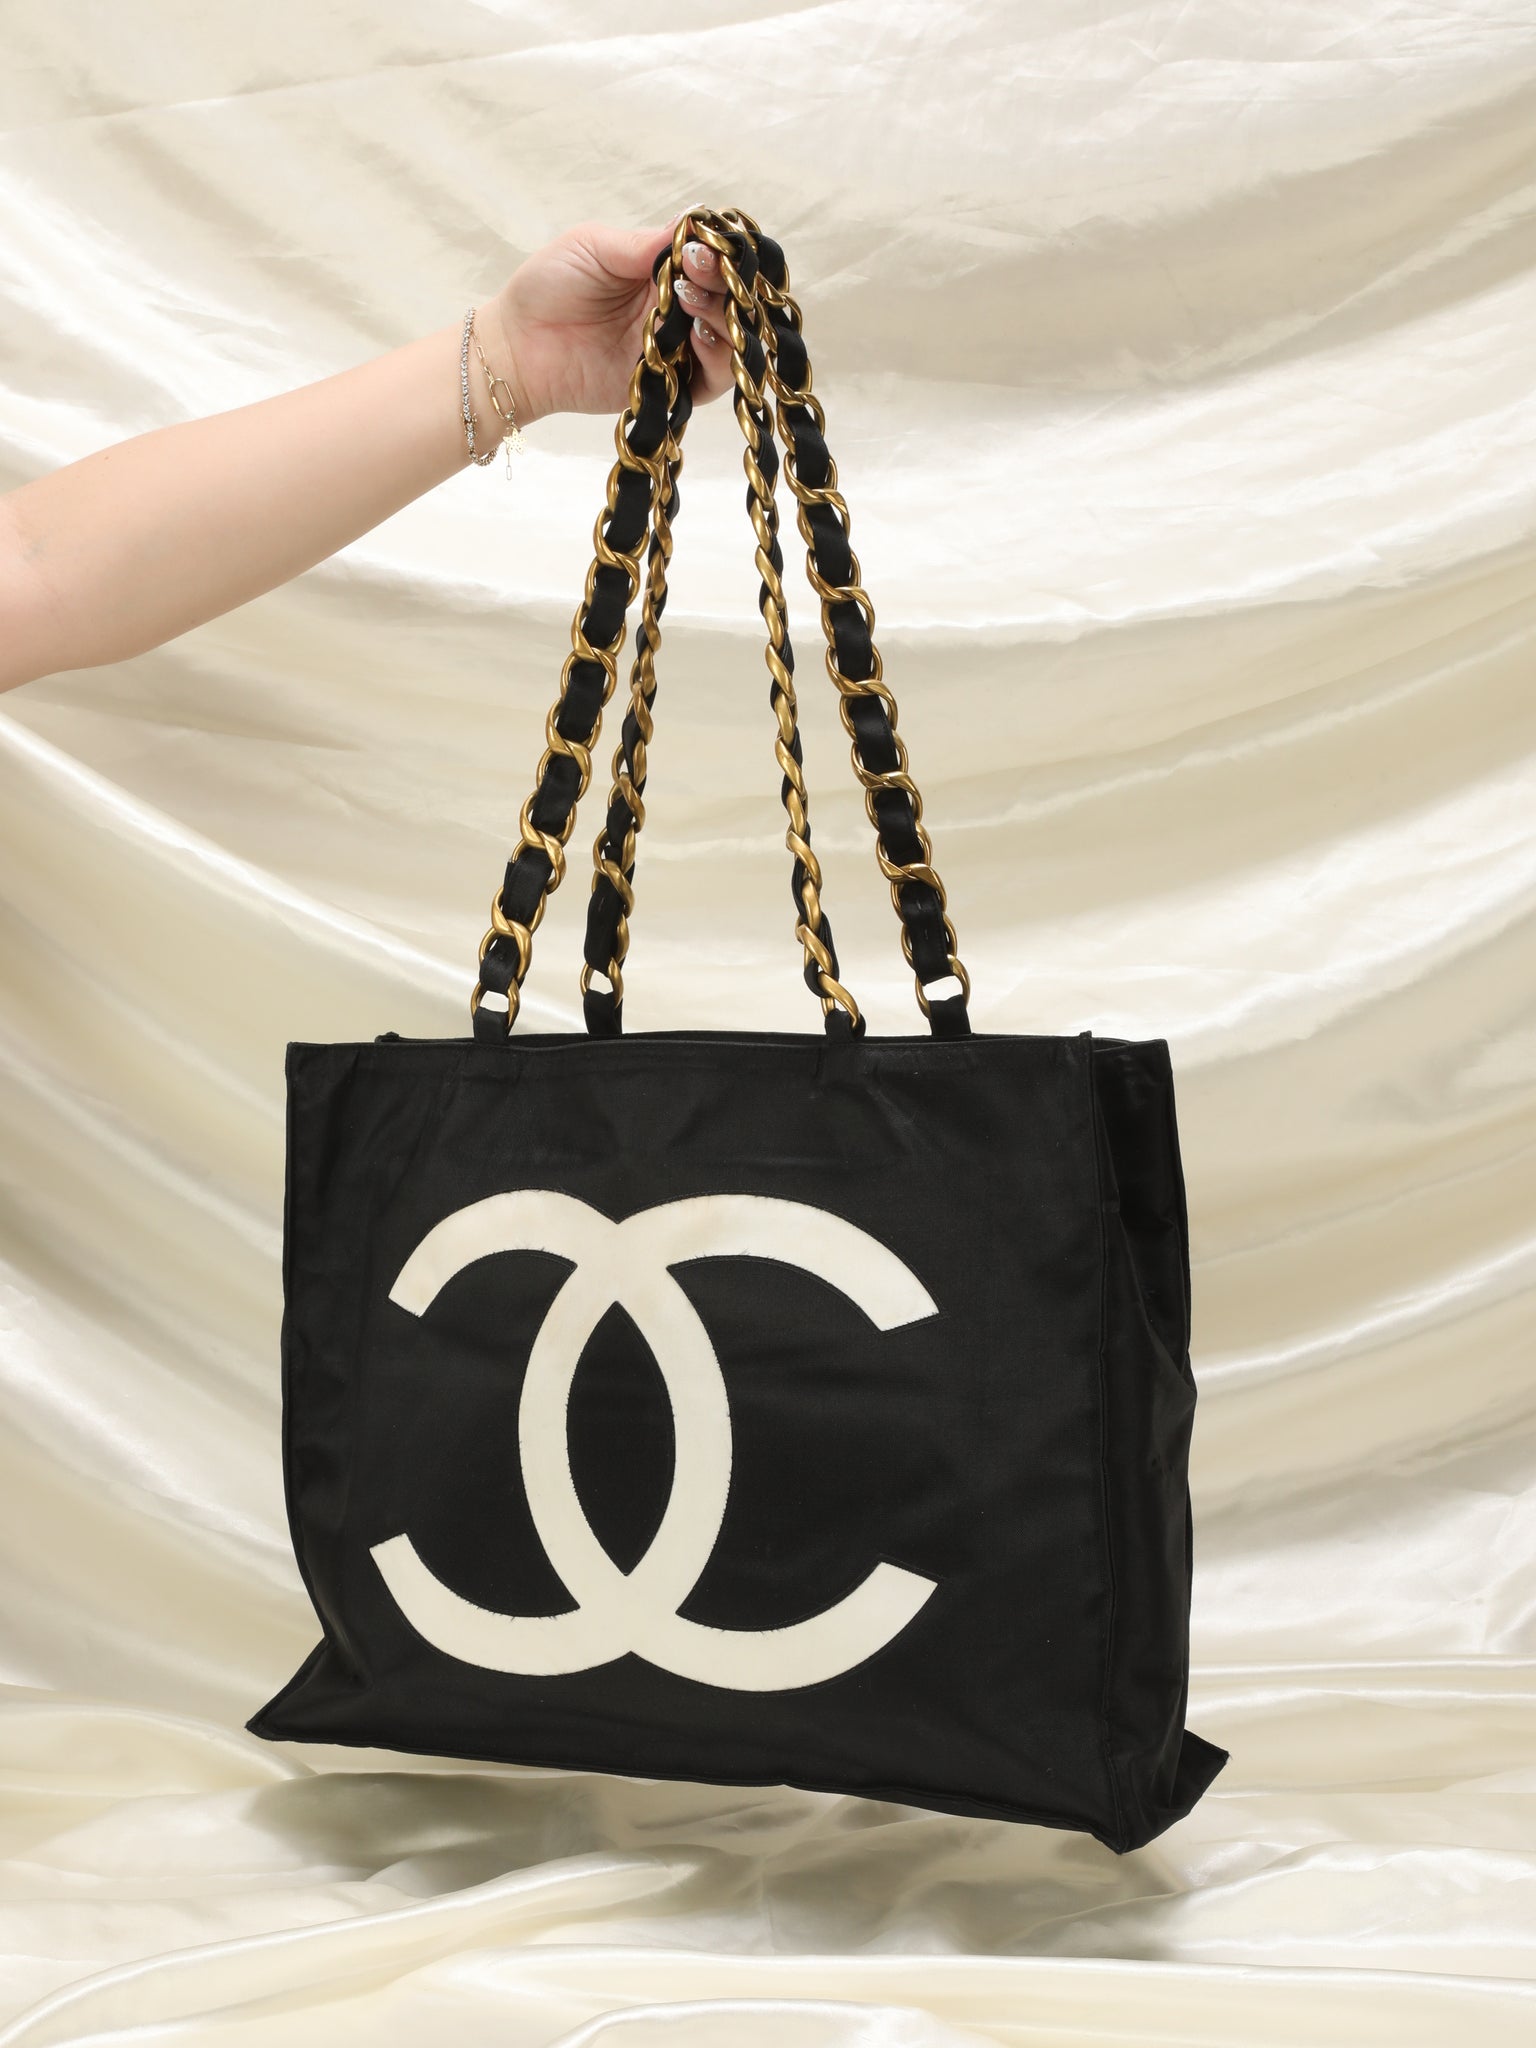 Chanel Black Leather Quilted CC Chain Tote Bag